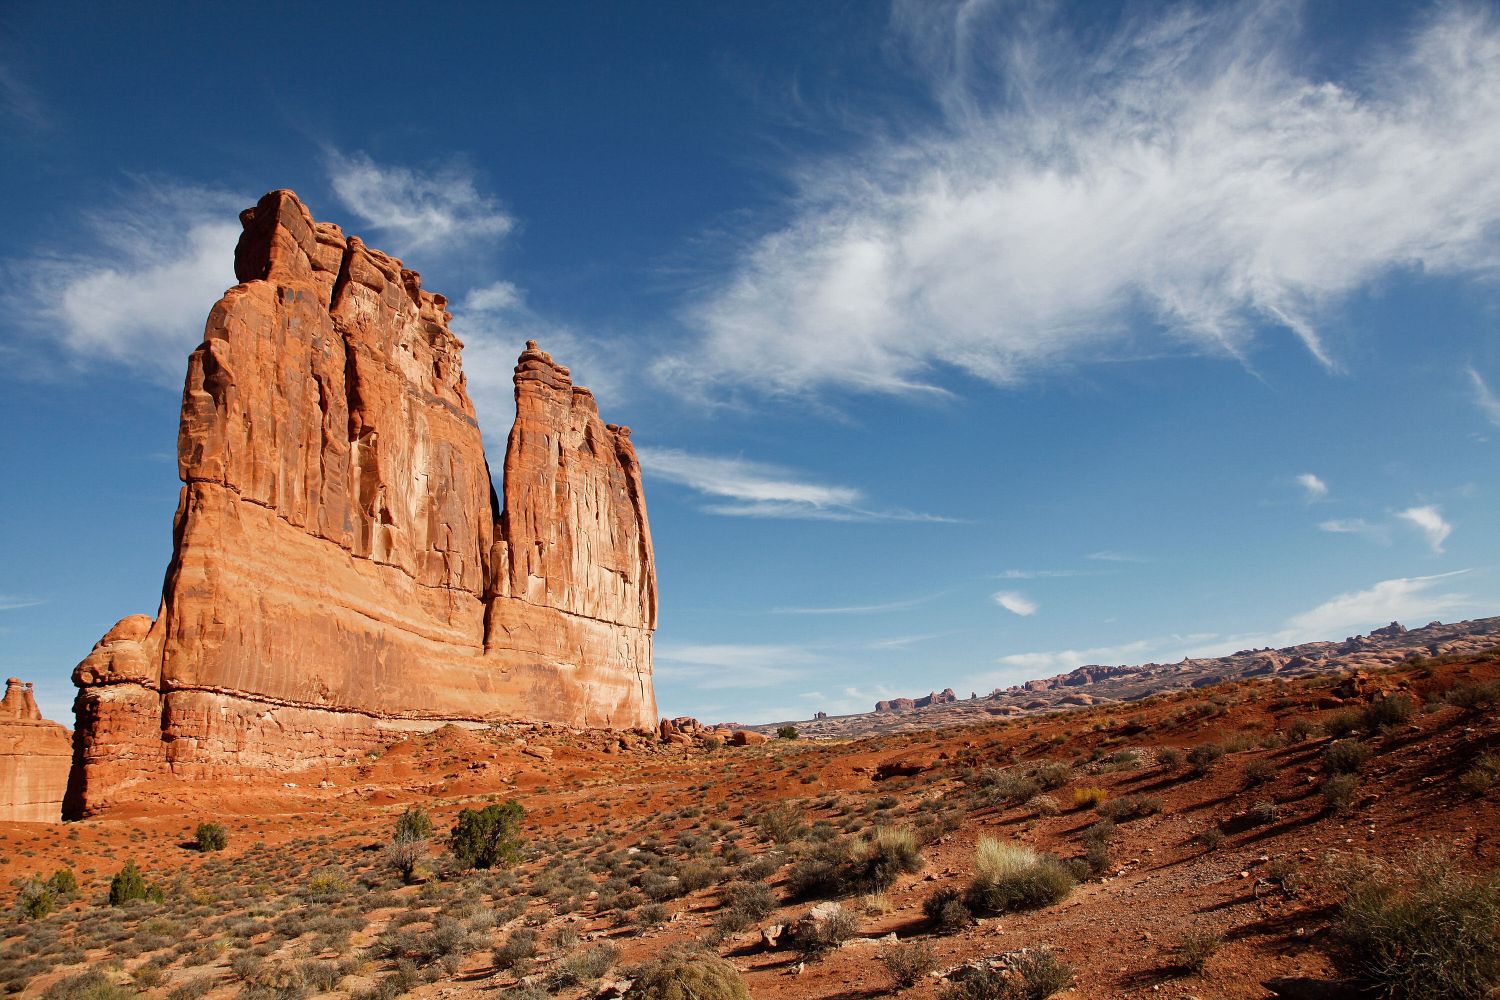 The Organ, Arches National Park